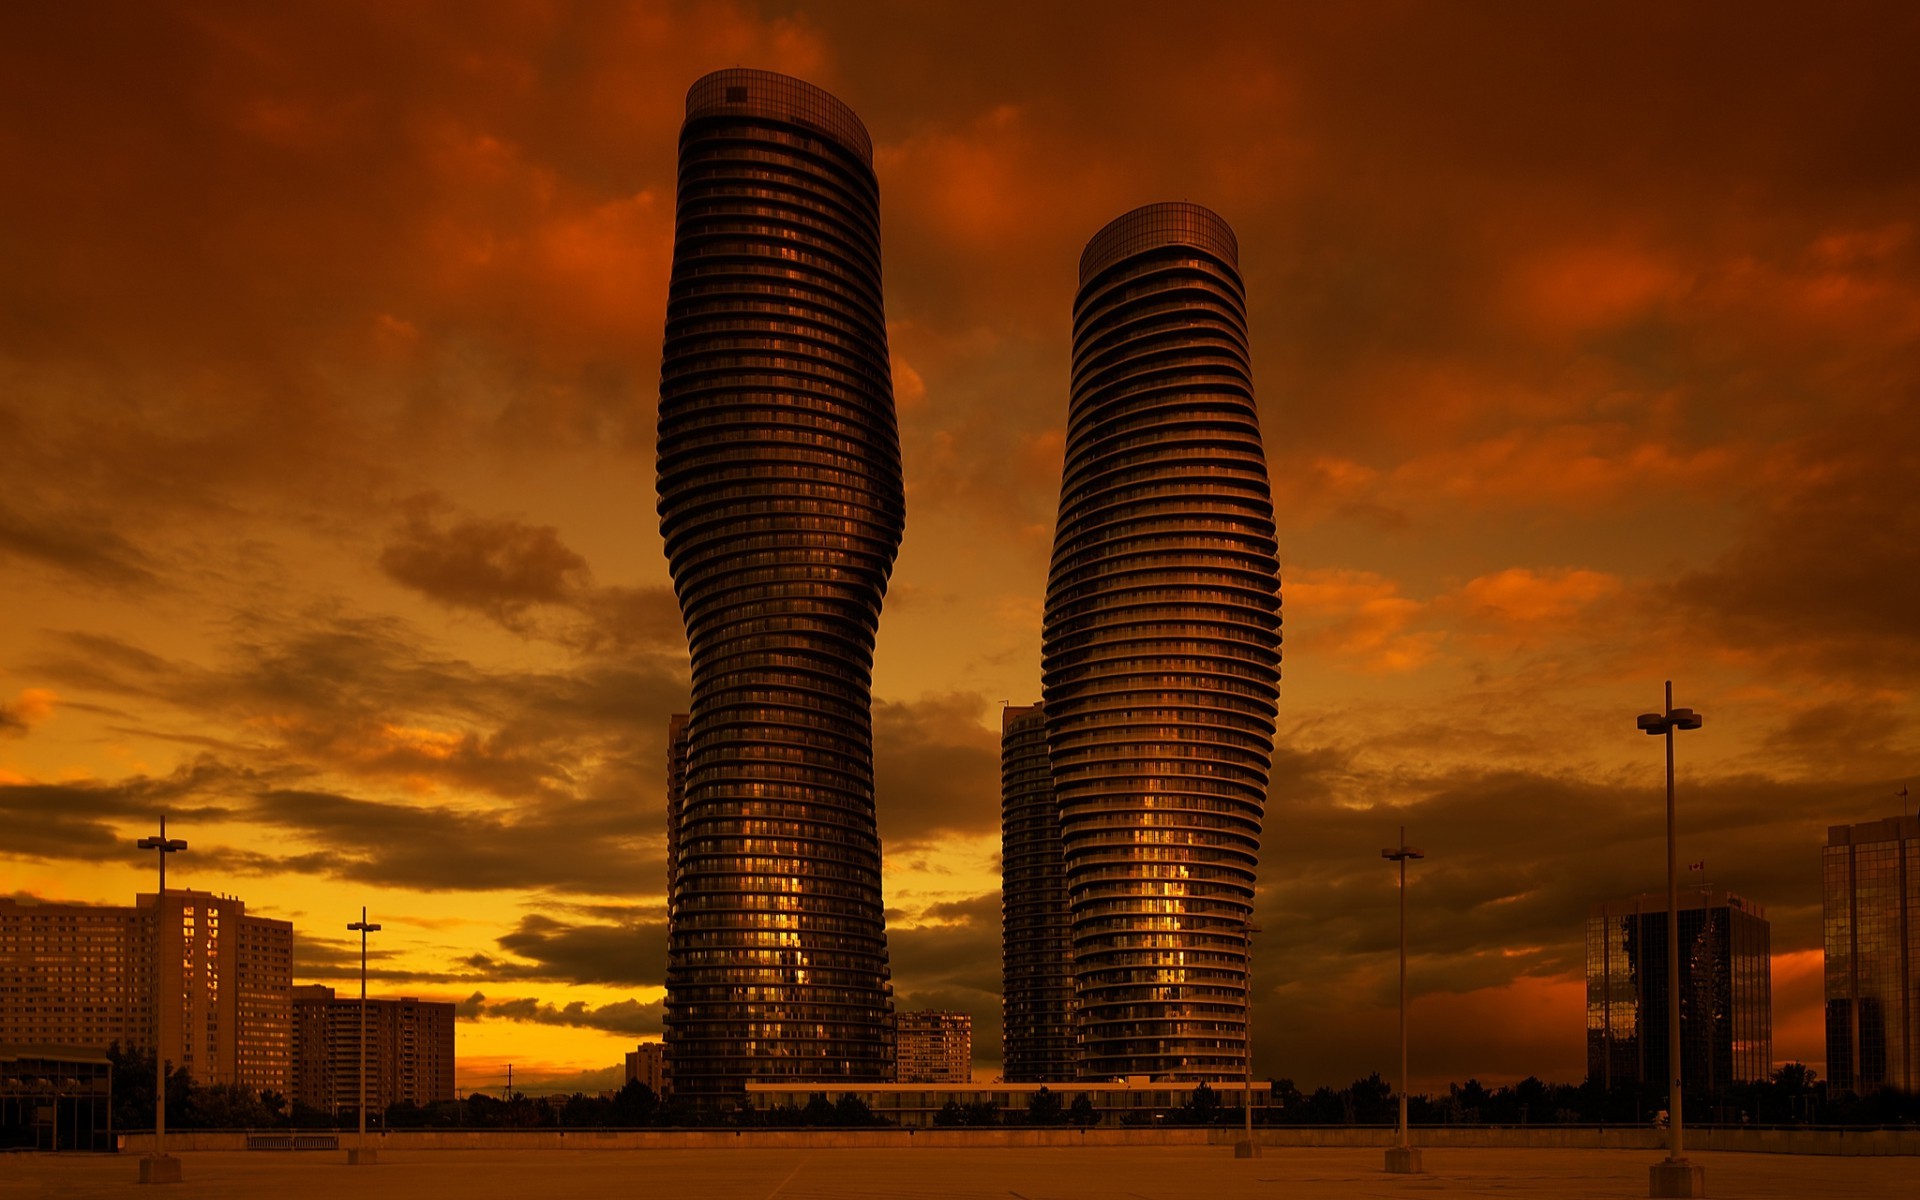 architecture, Cityscape, City, Skyscraper, Clouds, Modern, Ontario, Canada, Evening, Sunset, Building, Town square, Street light, Reflection, Window, Urban, Mississauga Wallpaper